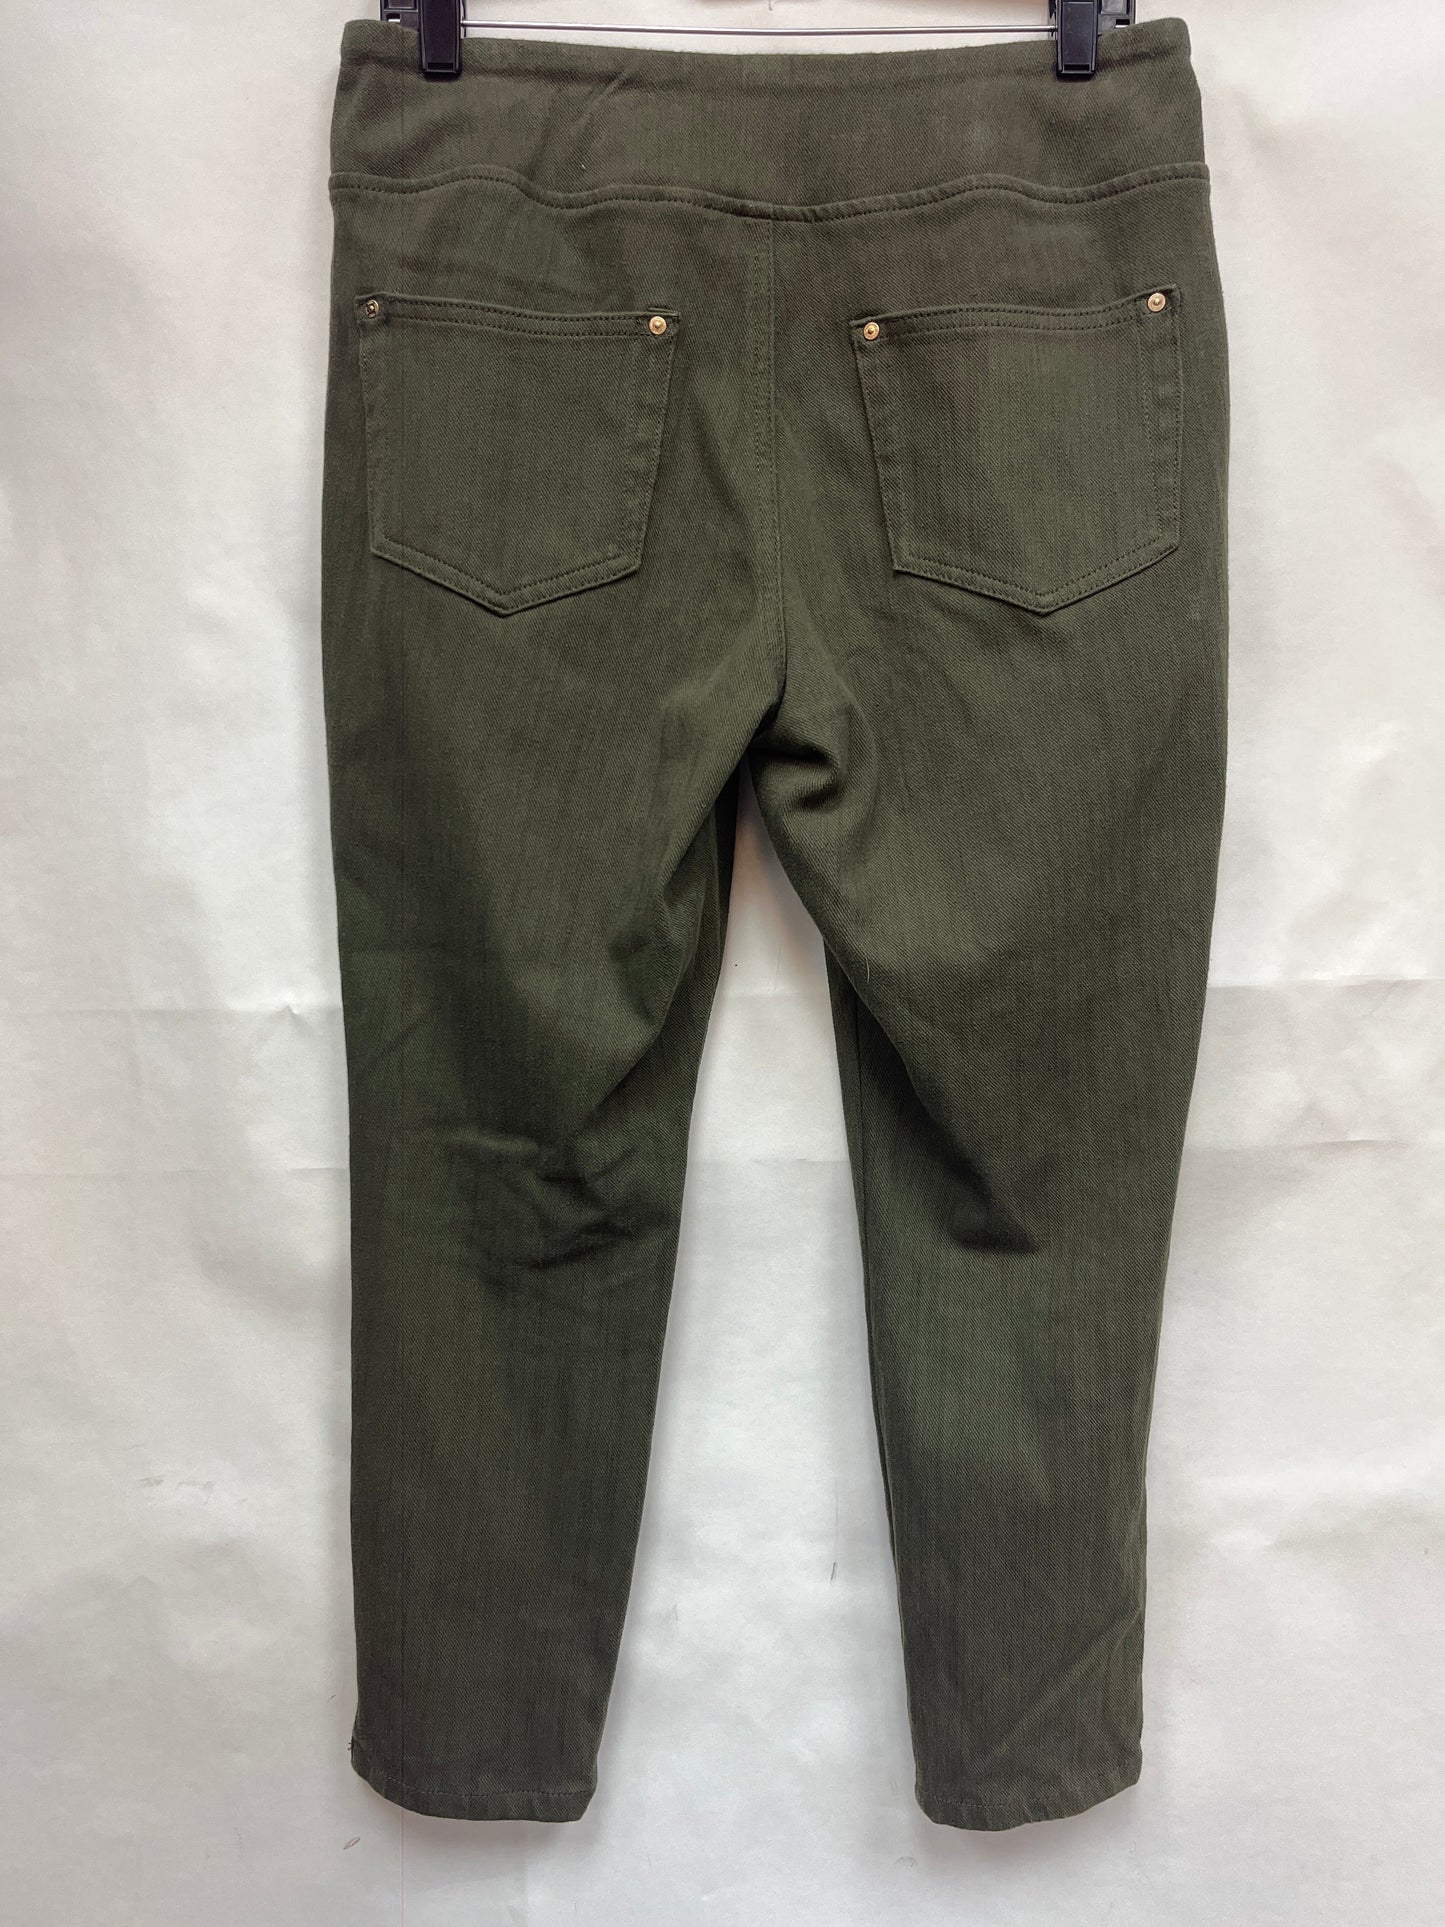 Pants Ankle By Clothes Mentor  Size: 10petite